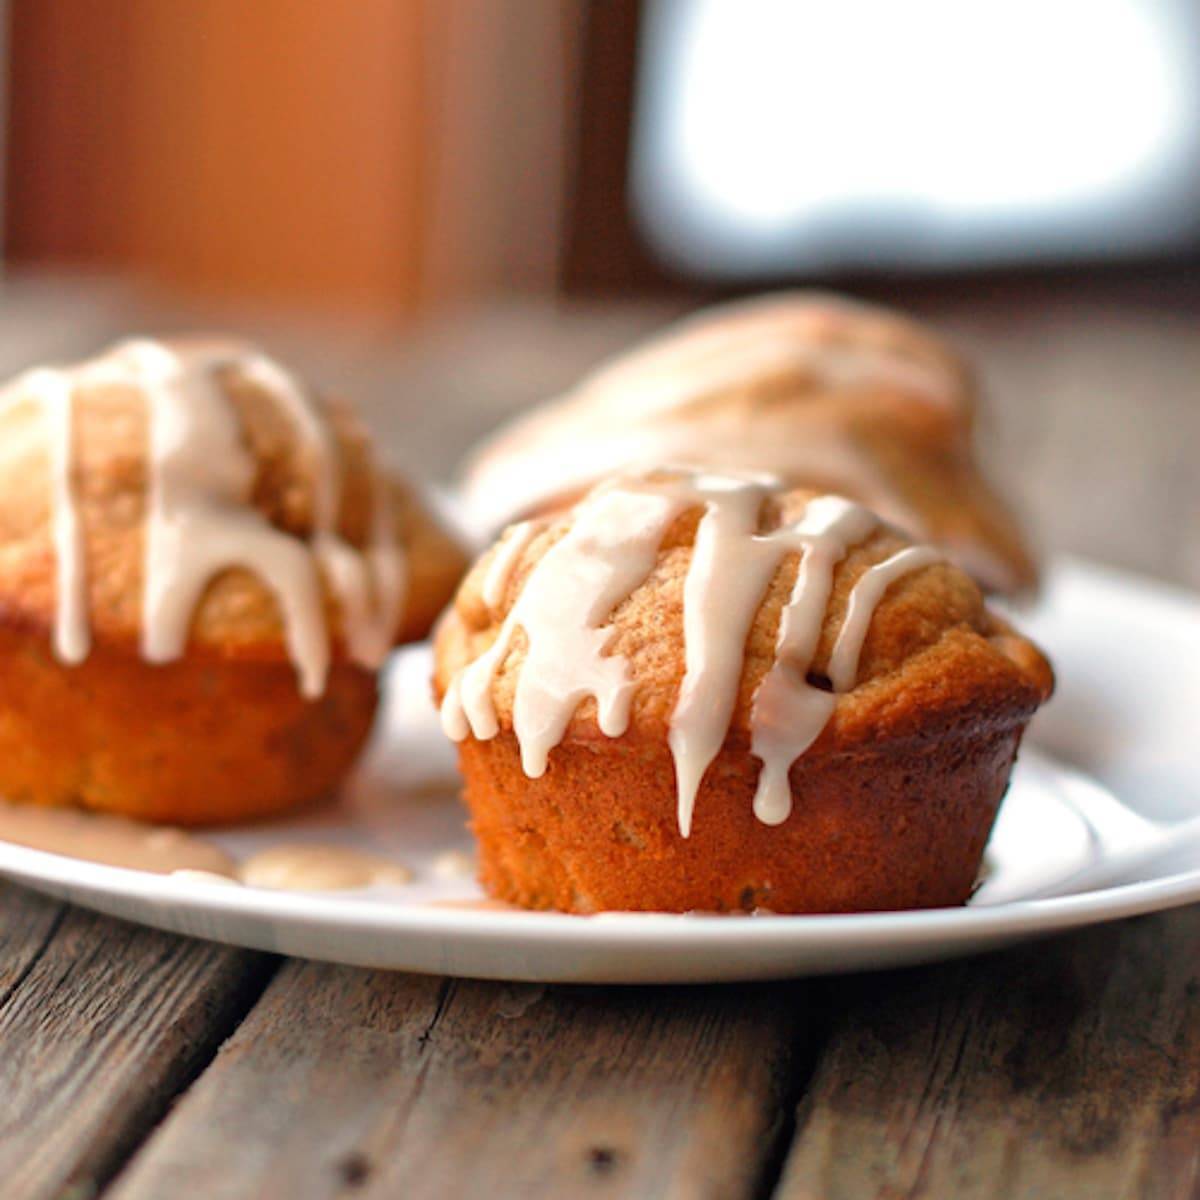 Apple cinnamon muffins topped with a warm vanilla glaze on a white plate.